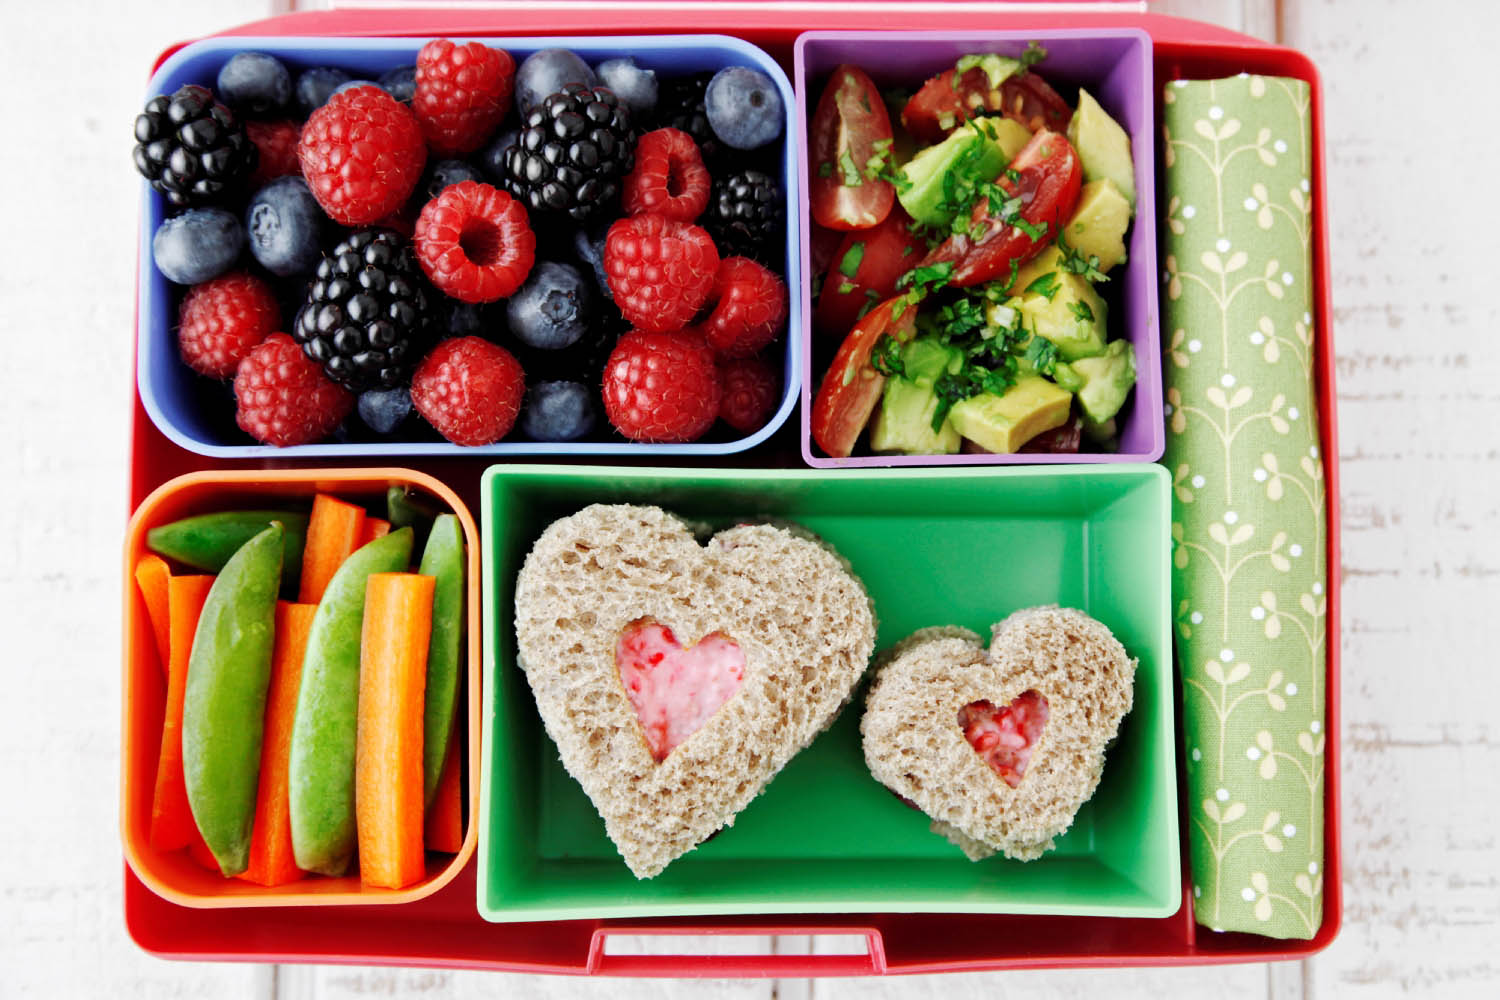 How To Make Cute Bento Boxes for Kids